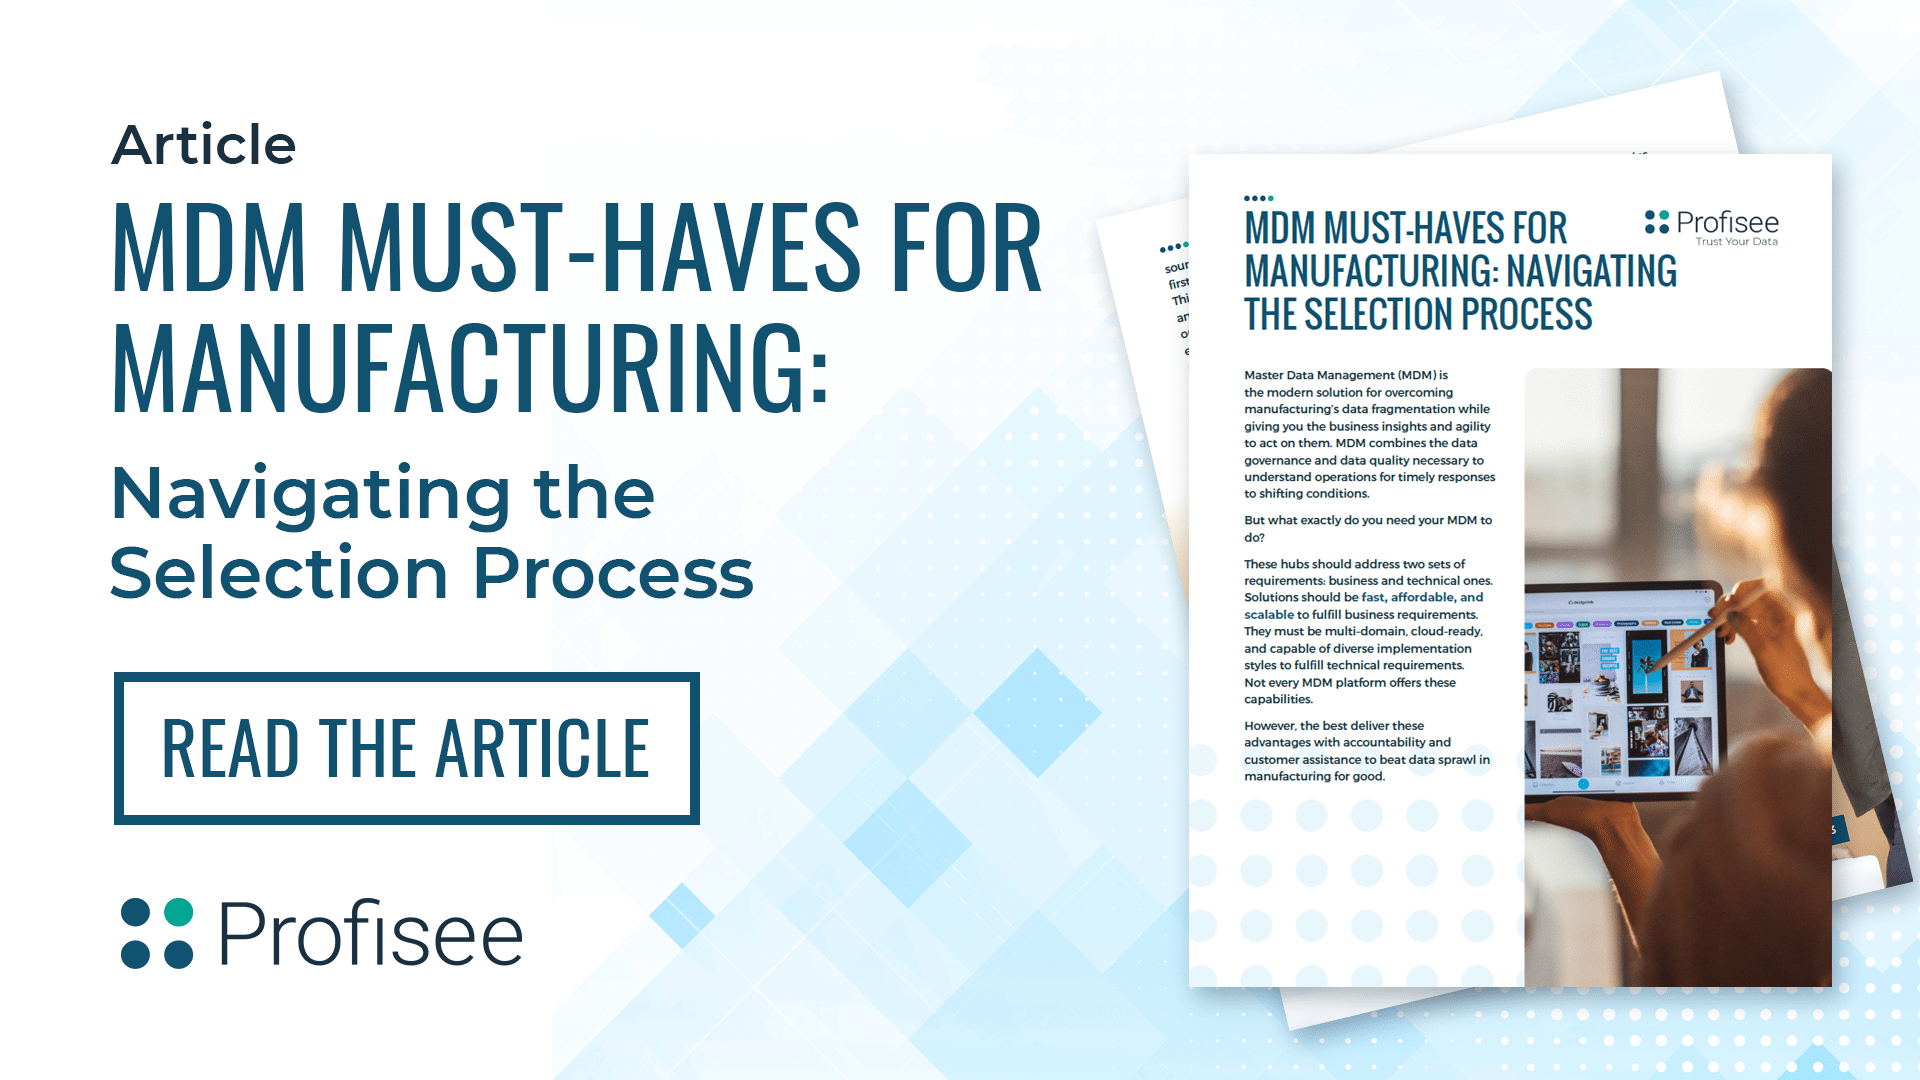 Master Data Management (MDM) helps manufacturers glean business insights from their operational data. Learn how to best navigate the selection process.